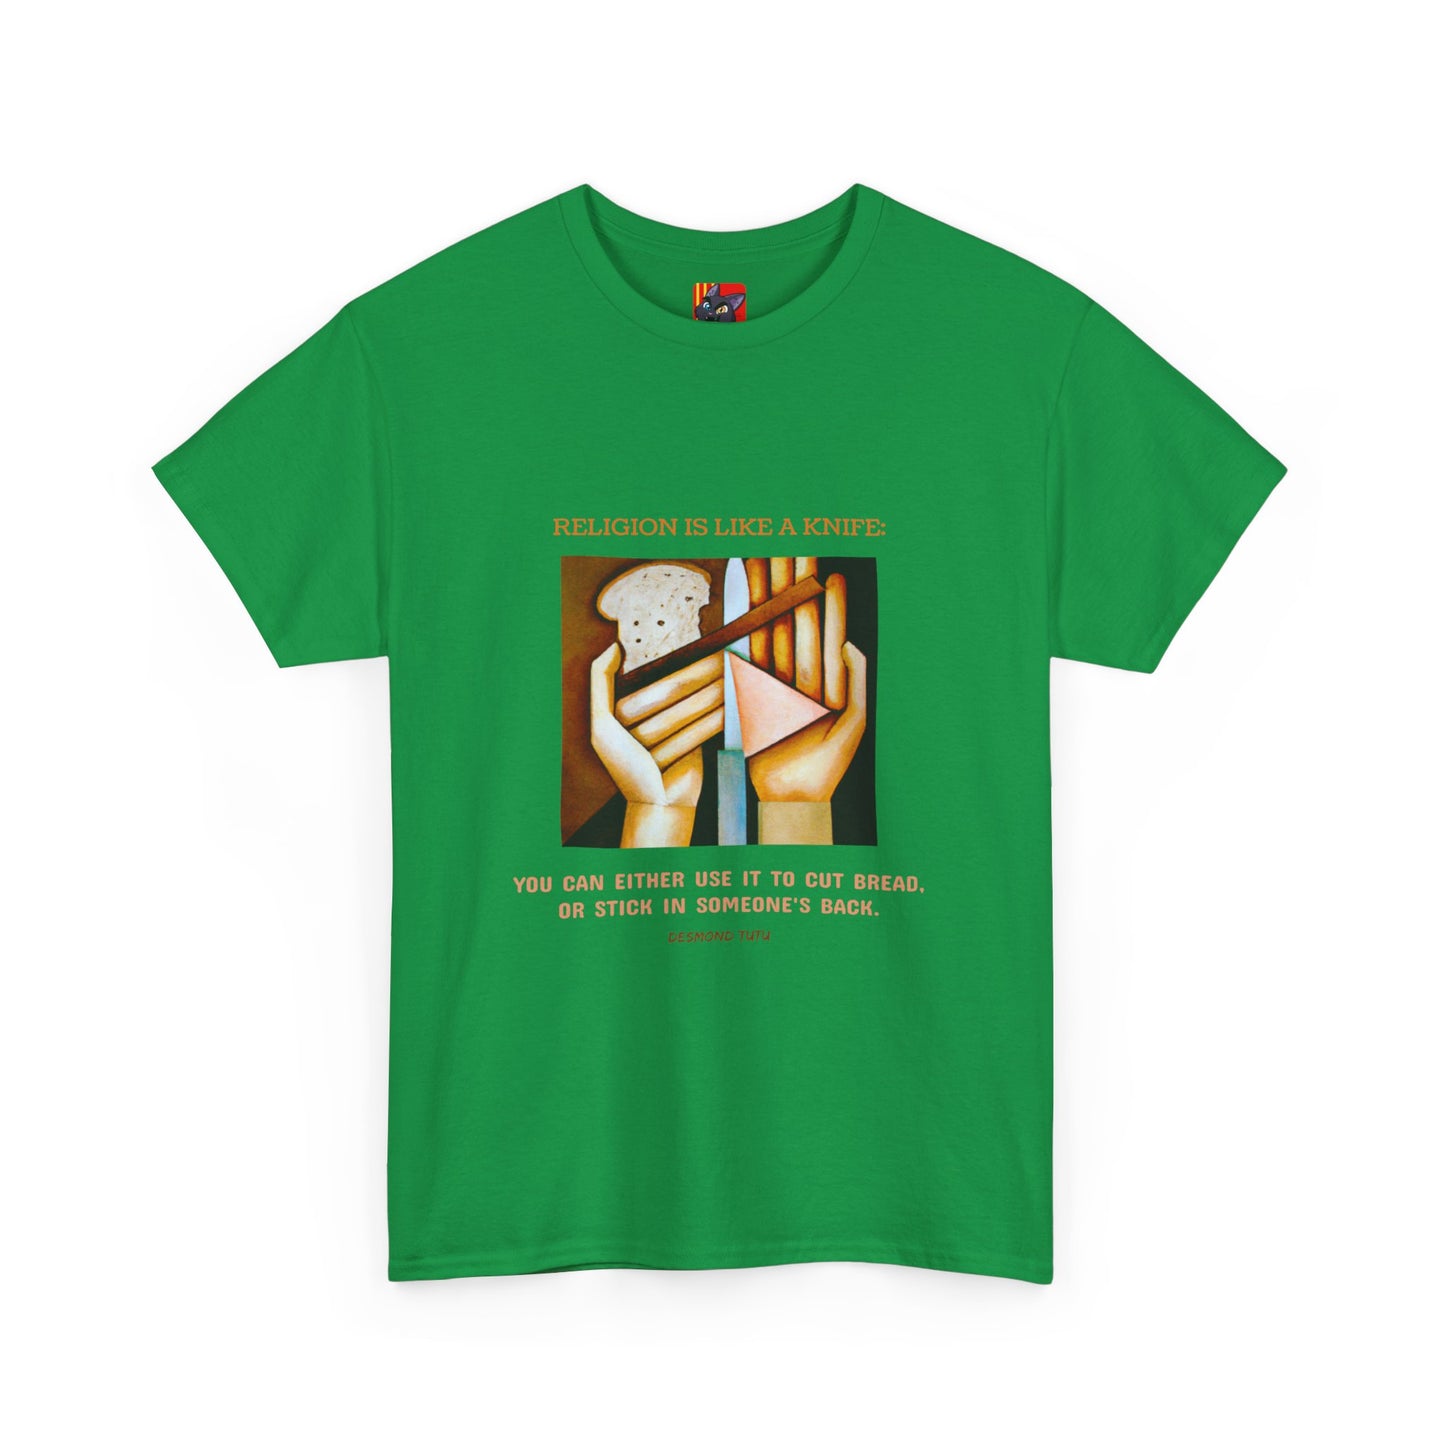 The Double-Edged Sword T-Shirt: Use Your Power Wisely"Religion is like a knife..." Desmond Tutu